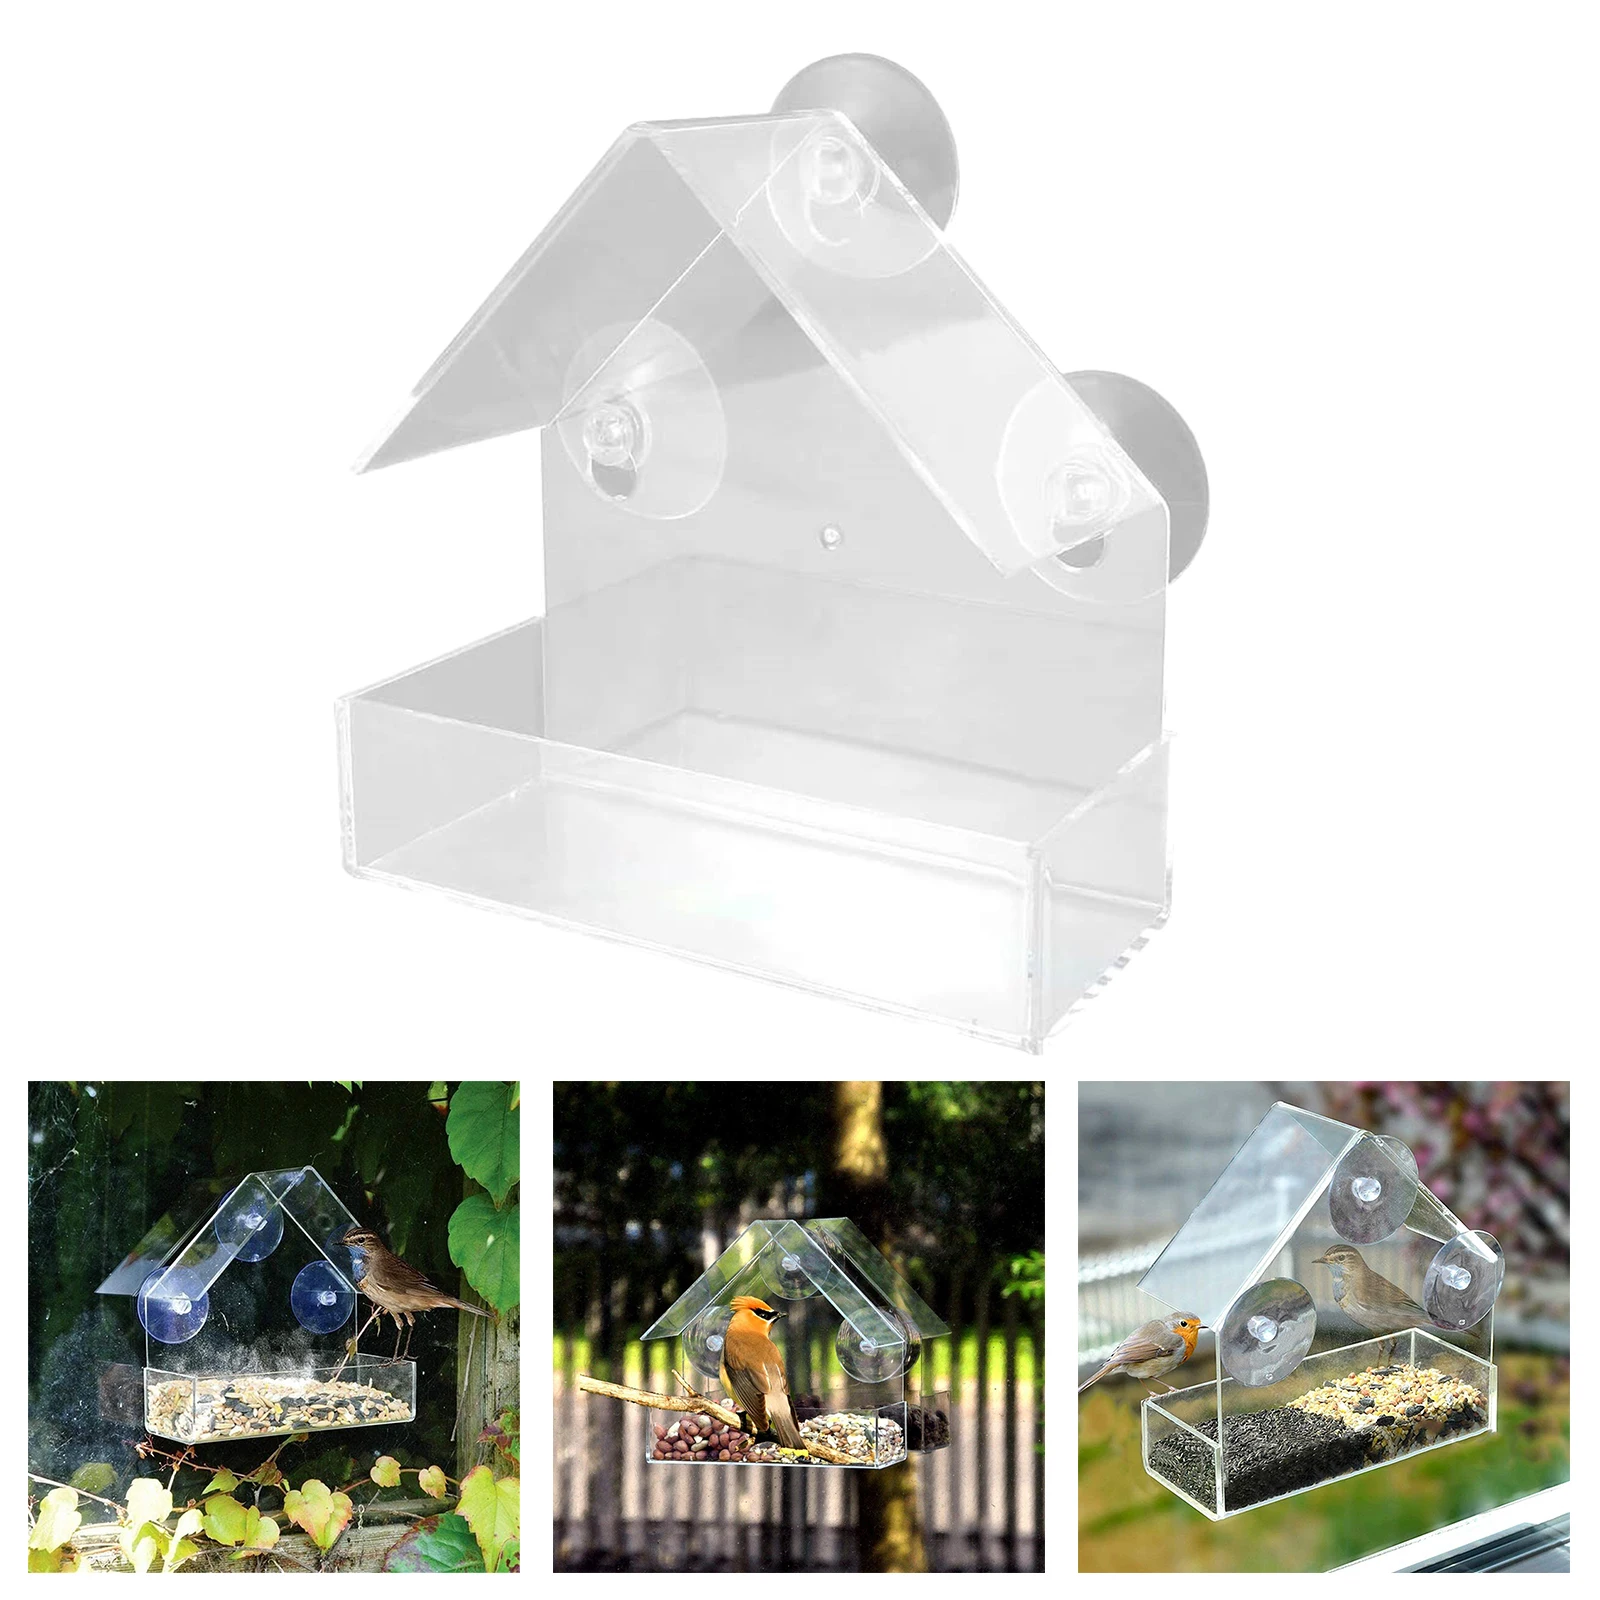 Window Bird Feeder - with 3 Strong Suction Cups - Bird Seed Tray - Bird House Bird Feeders for Outside - Gift for Kids